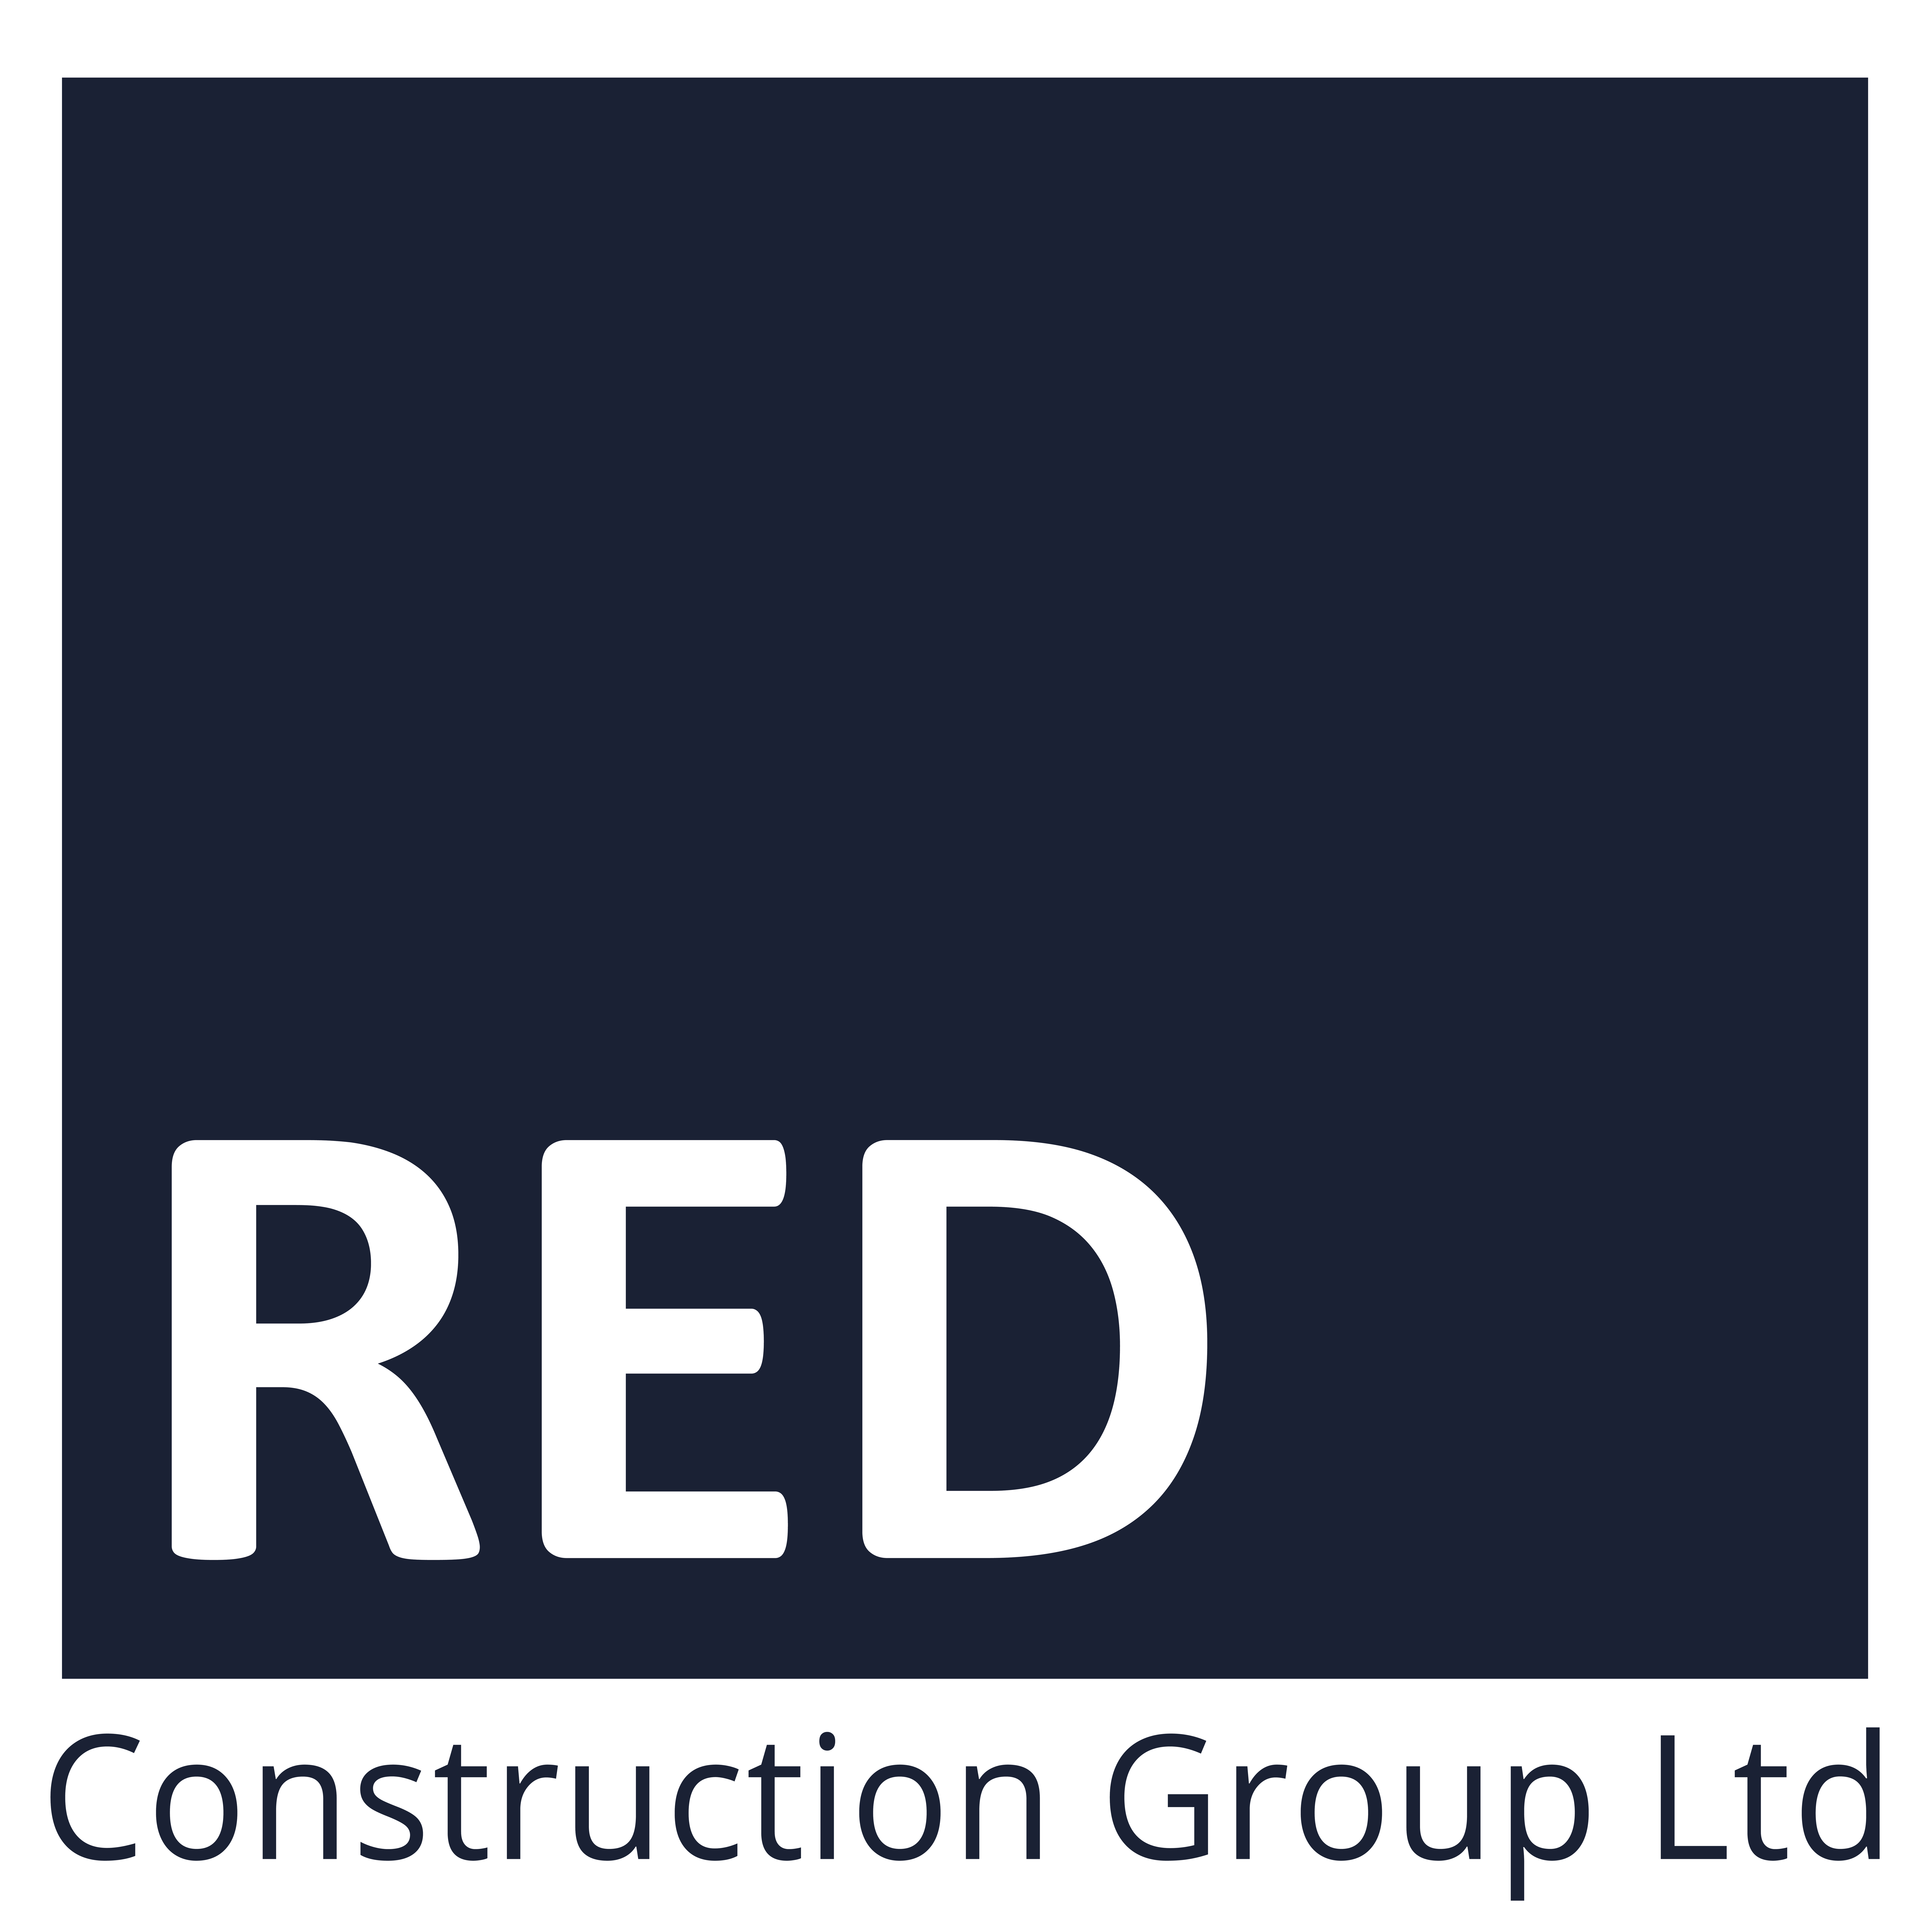 RED Construction - Site Inspection Rev 3 